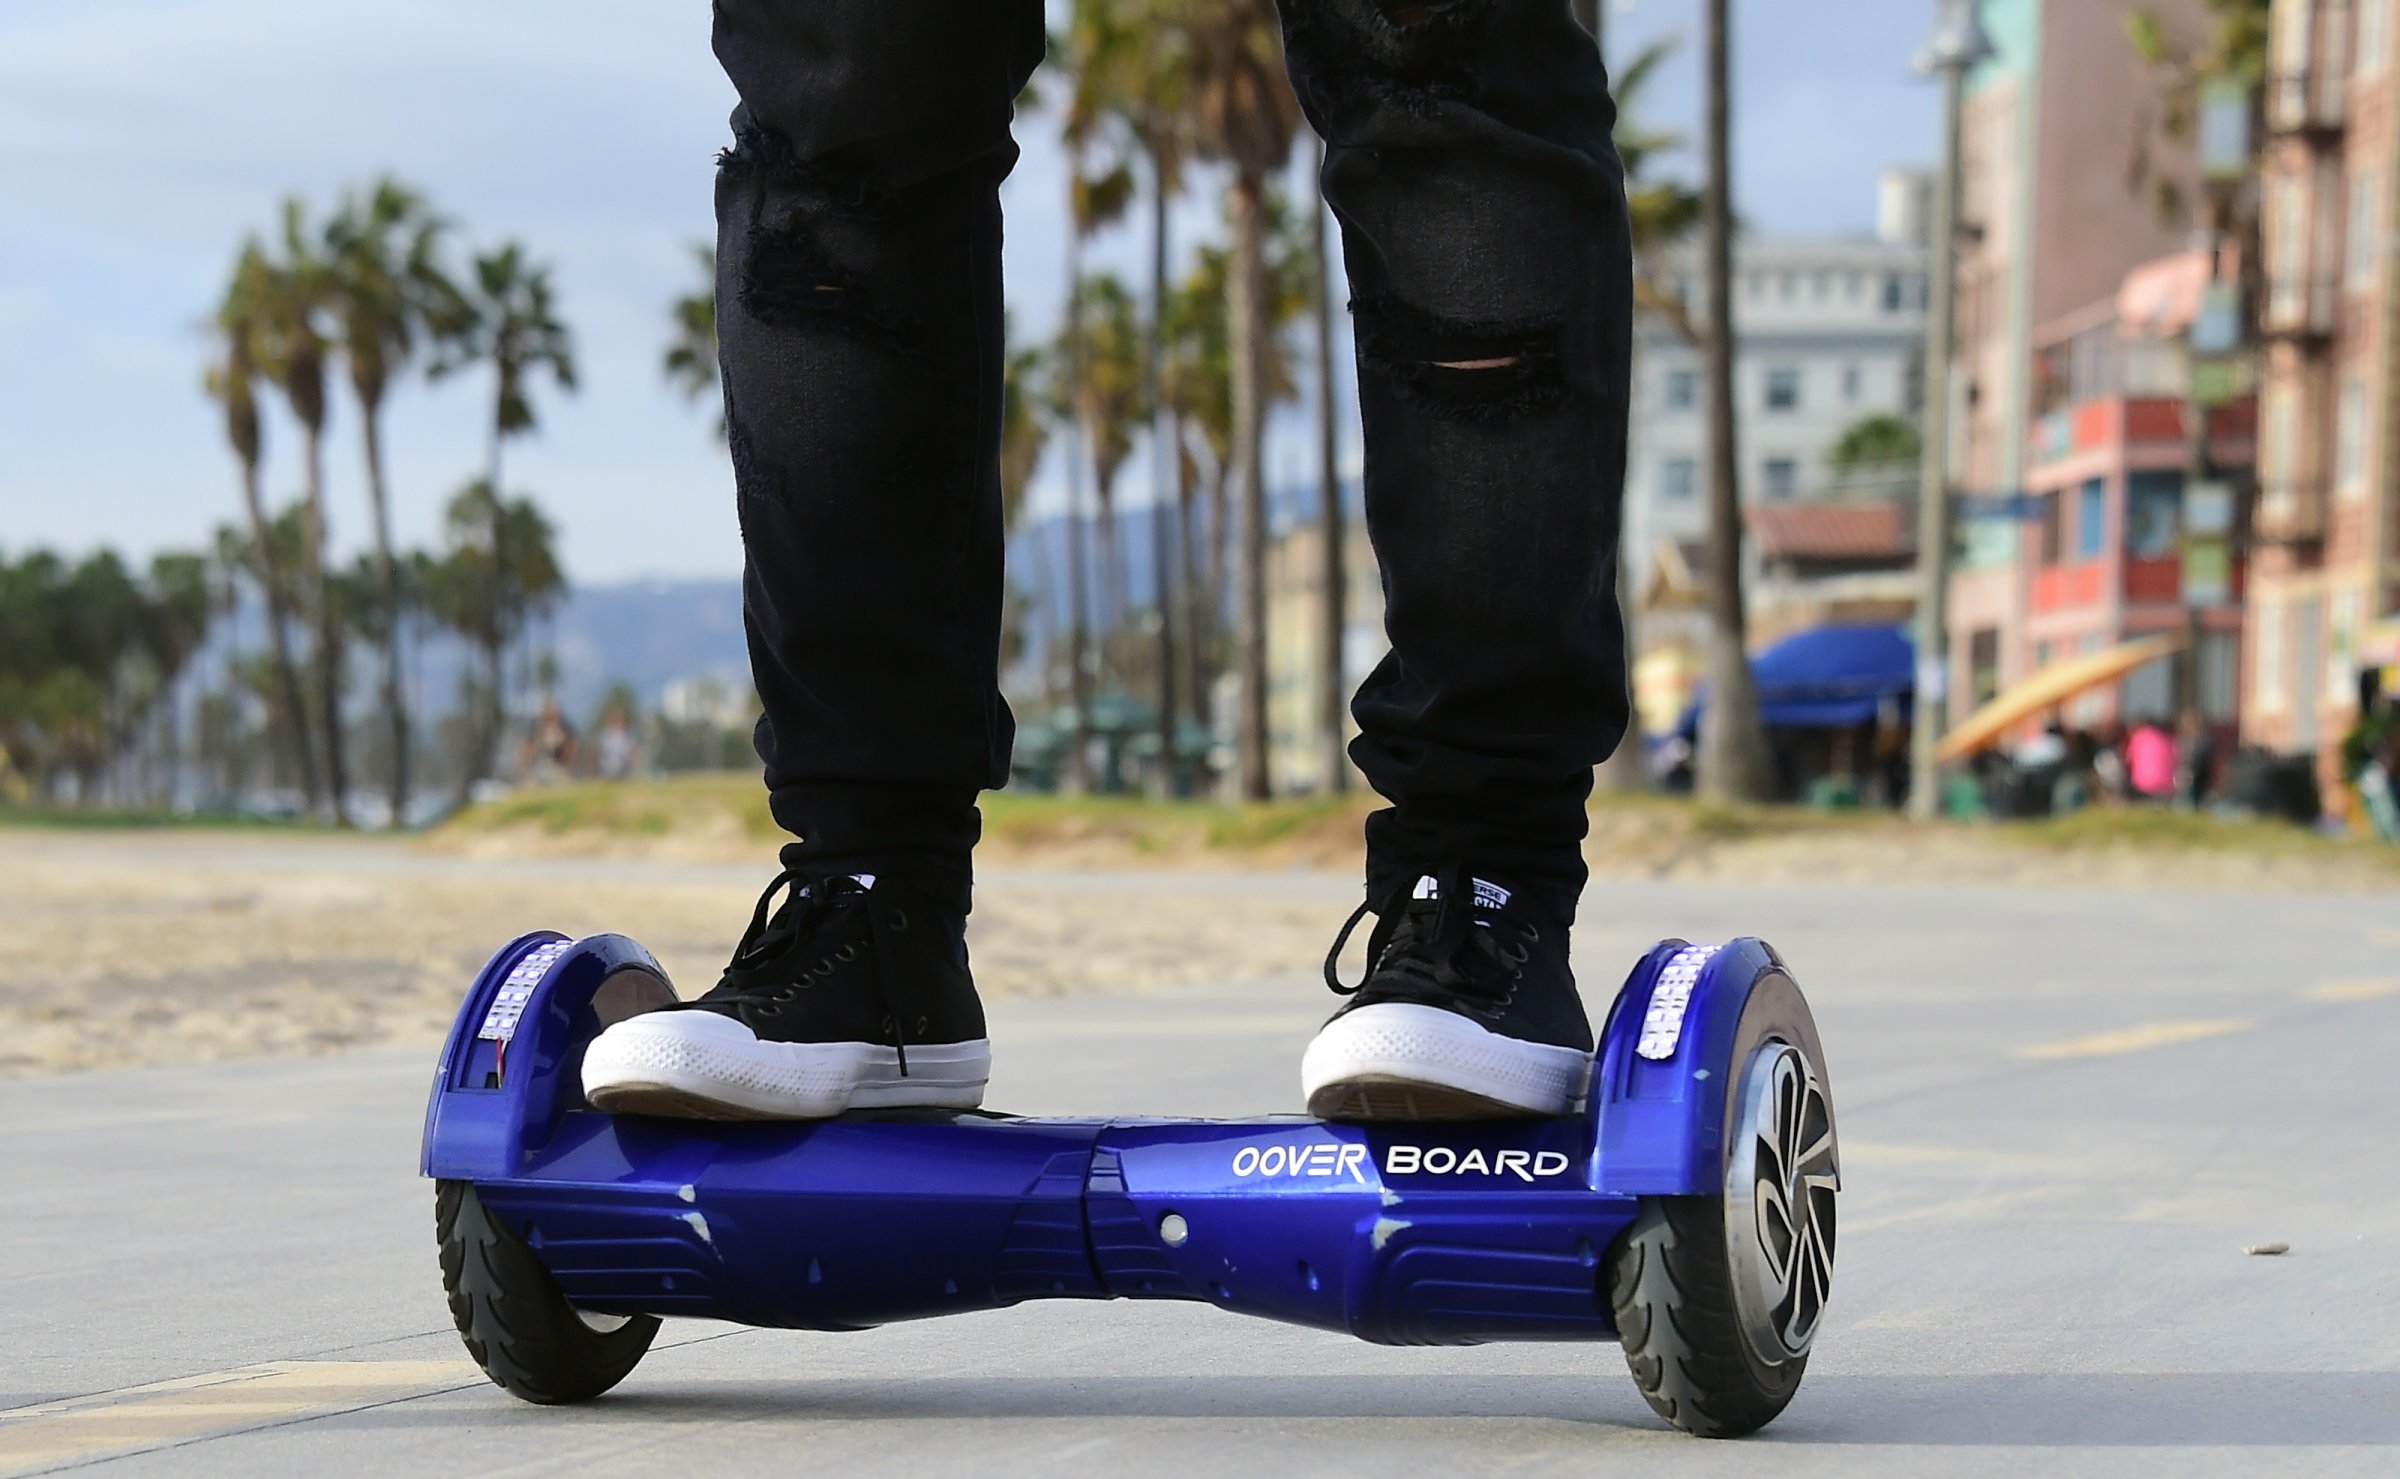 Michael Tran uses his hoverboard on the Venice Beach Boardwalk on December 10, 2015.